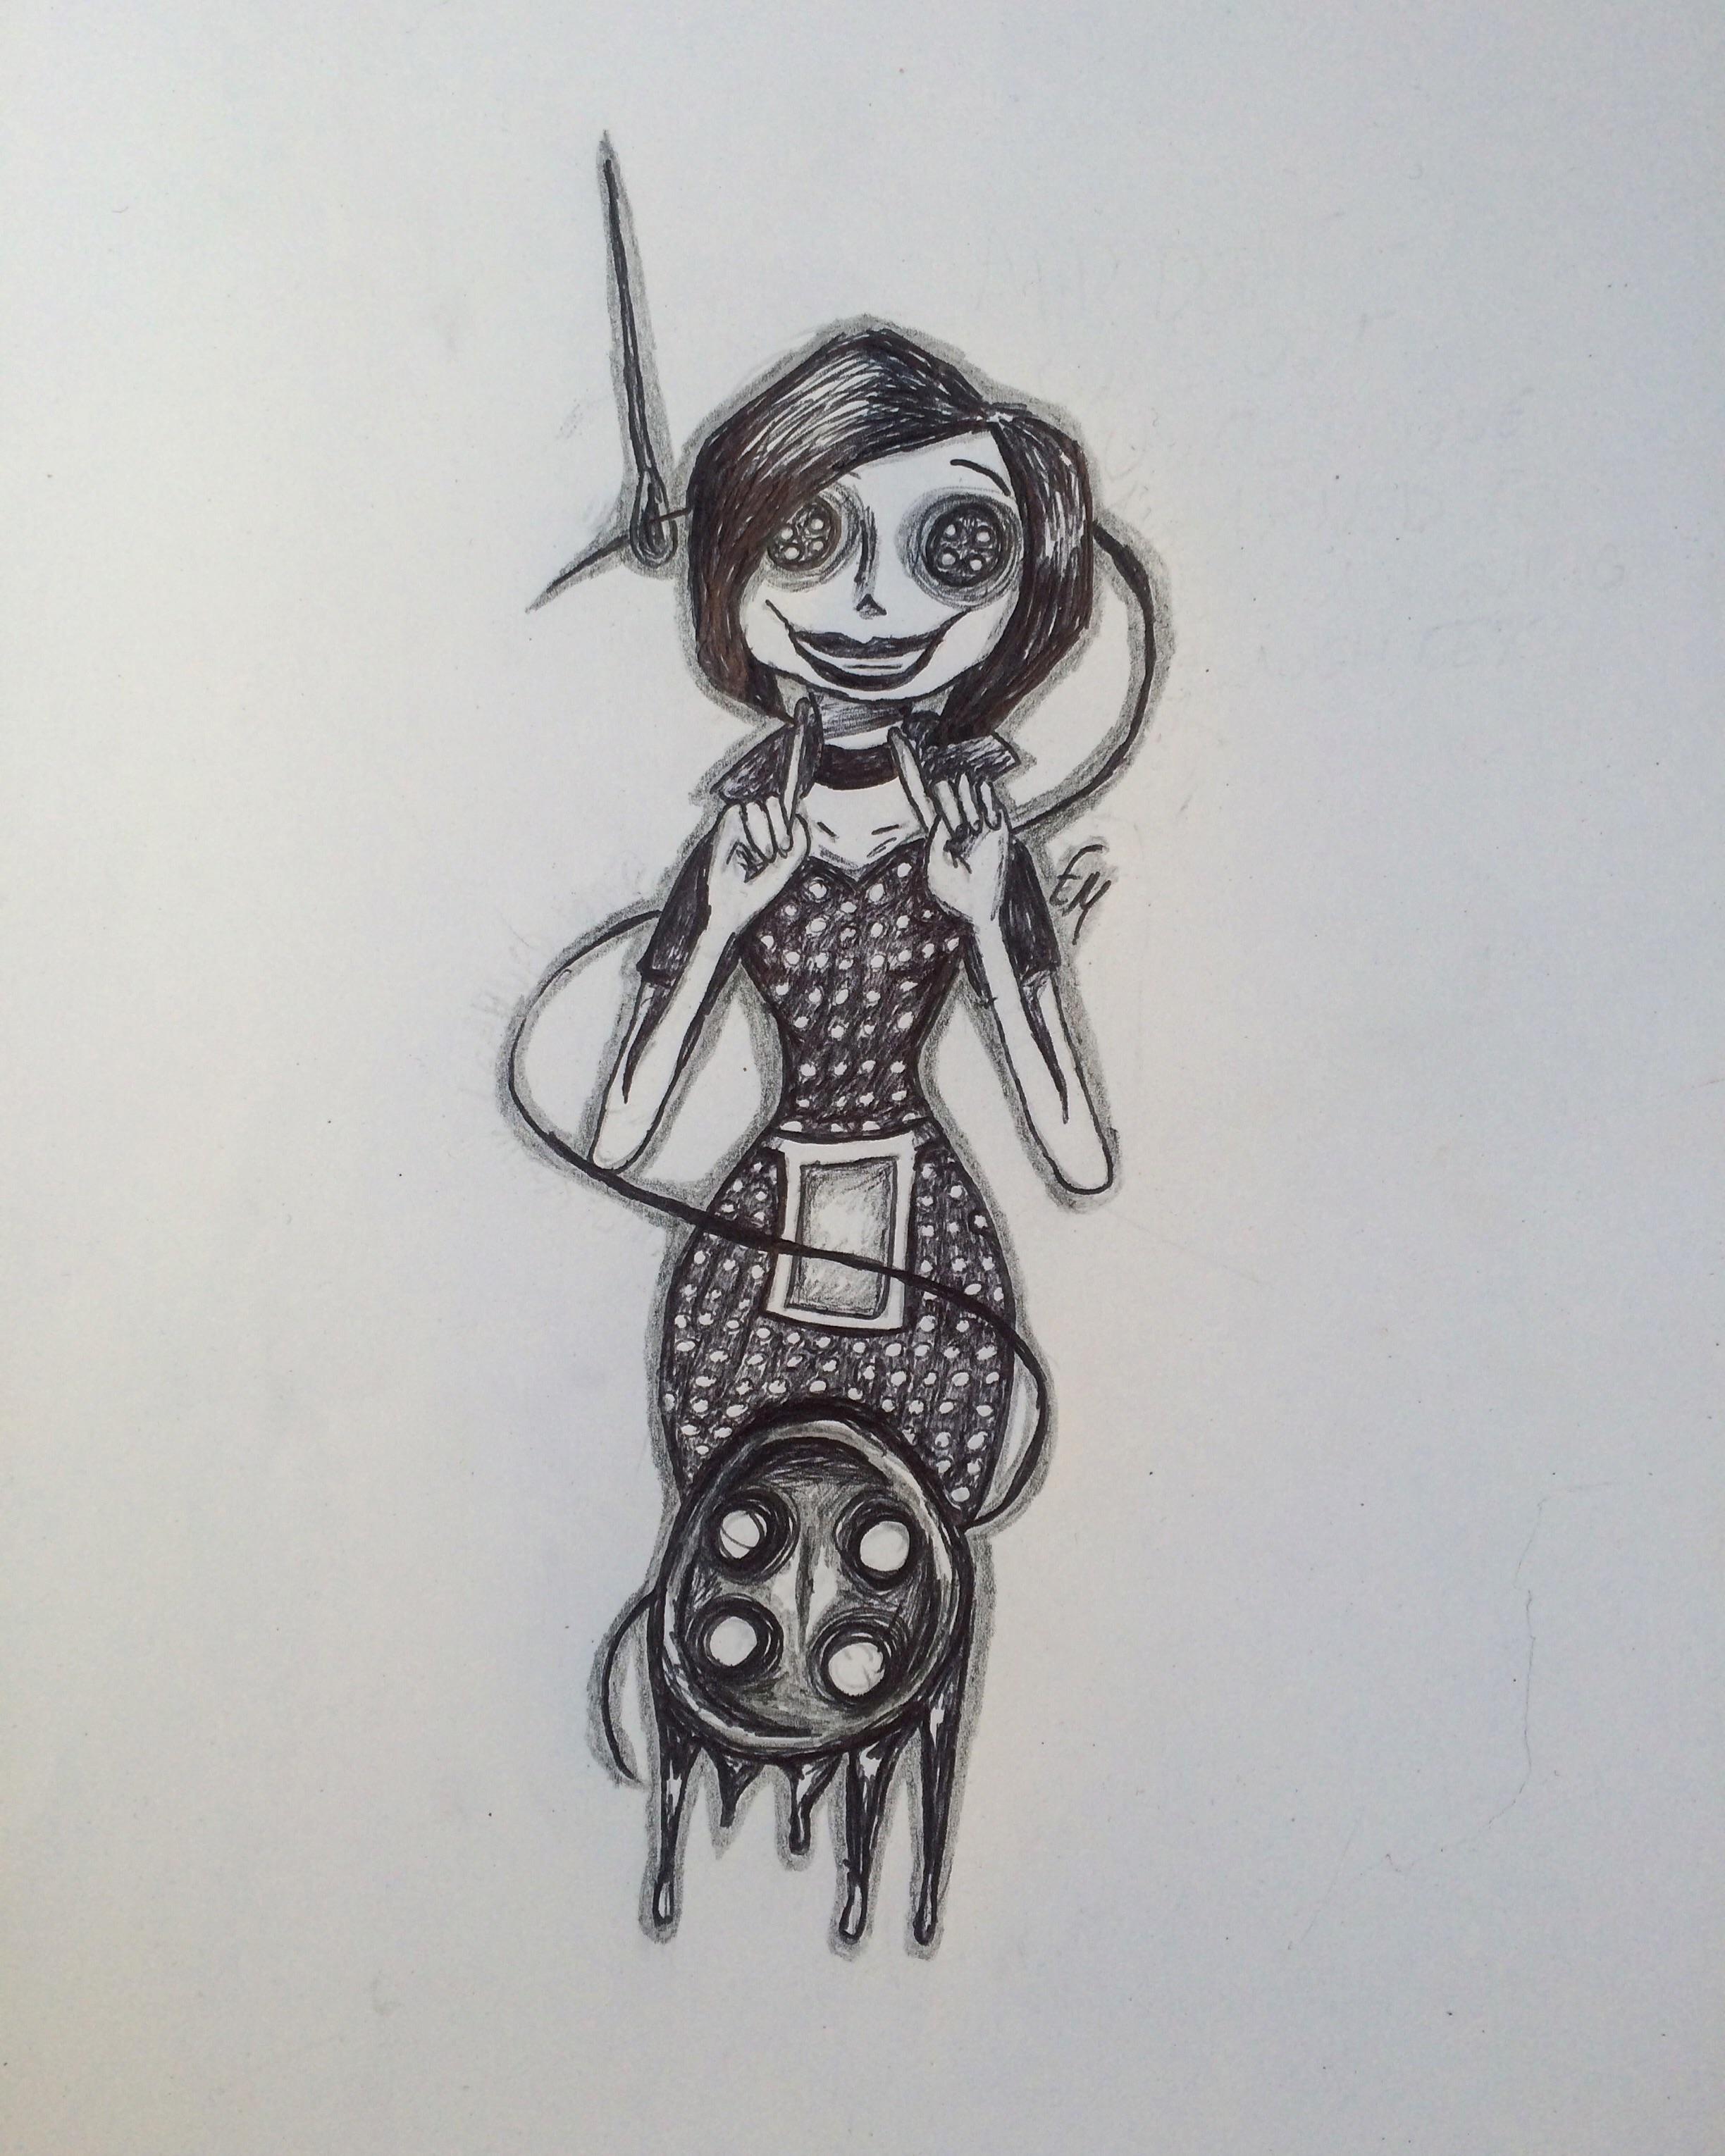 Coraline Drawings at PaintingValley.com | Explore collection of